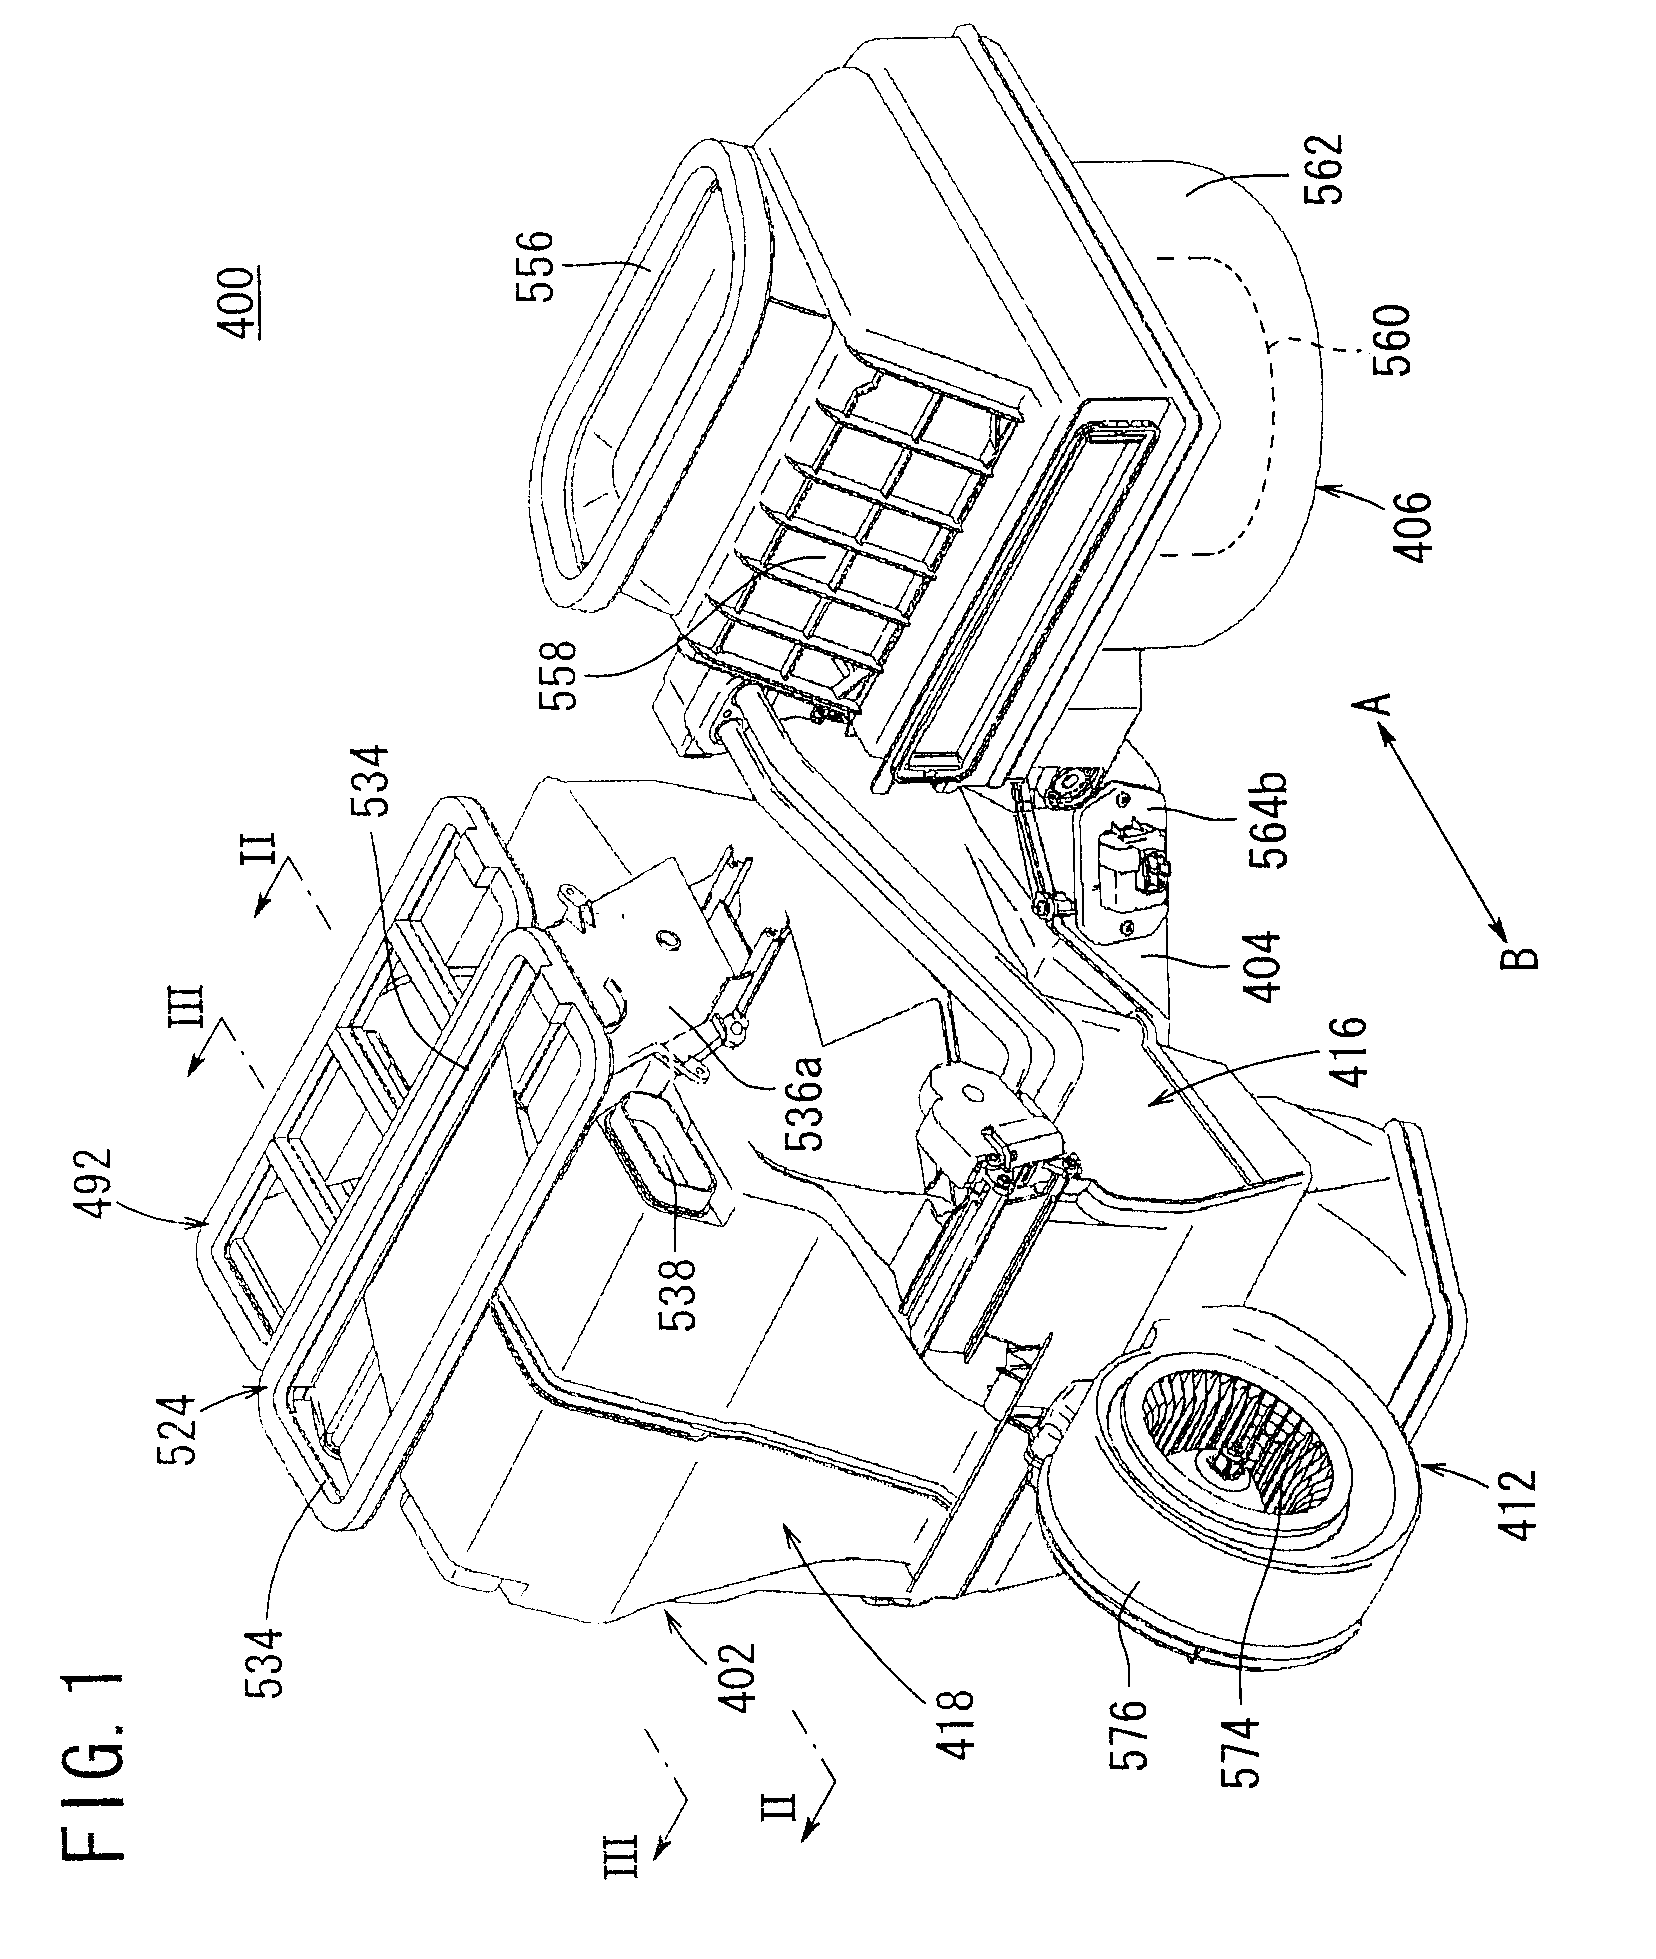 Heat exchanger for vehicular air conditioning apparatus